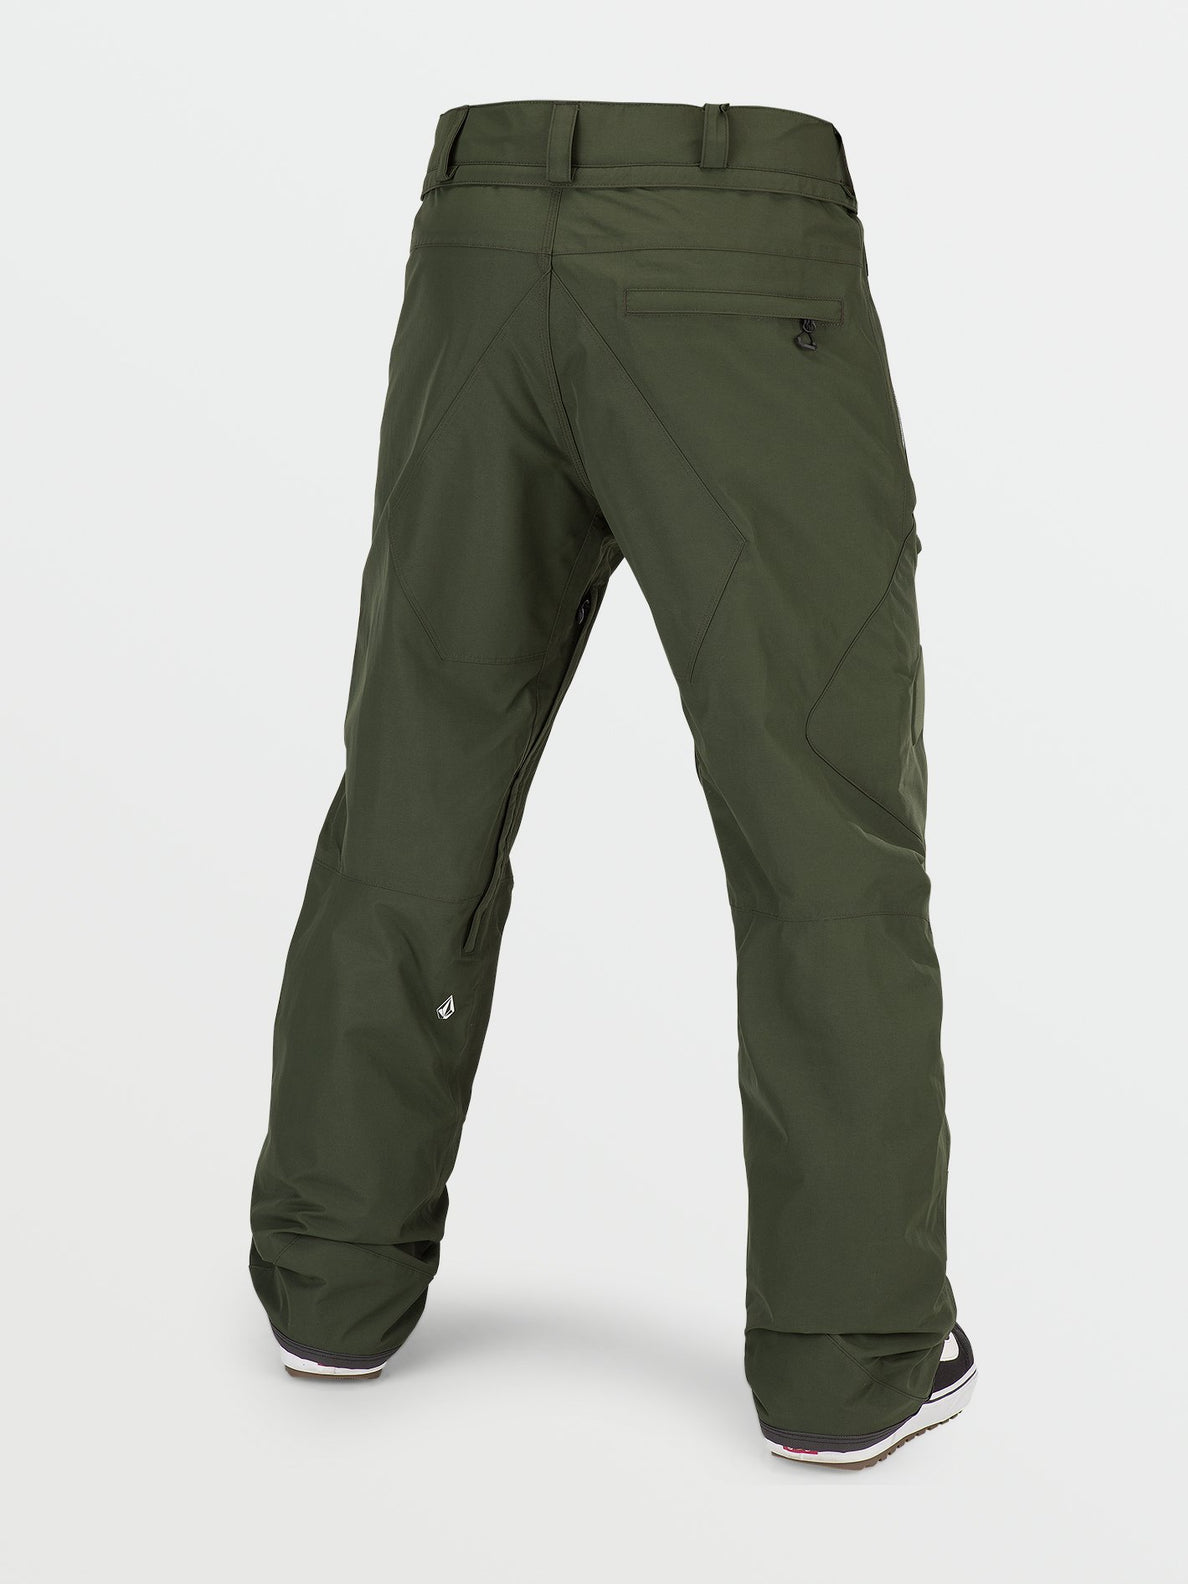 L Gore-Tex Trousers - SATURATED GREEN (G1351904_SAG) [B]